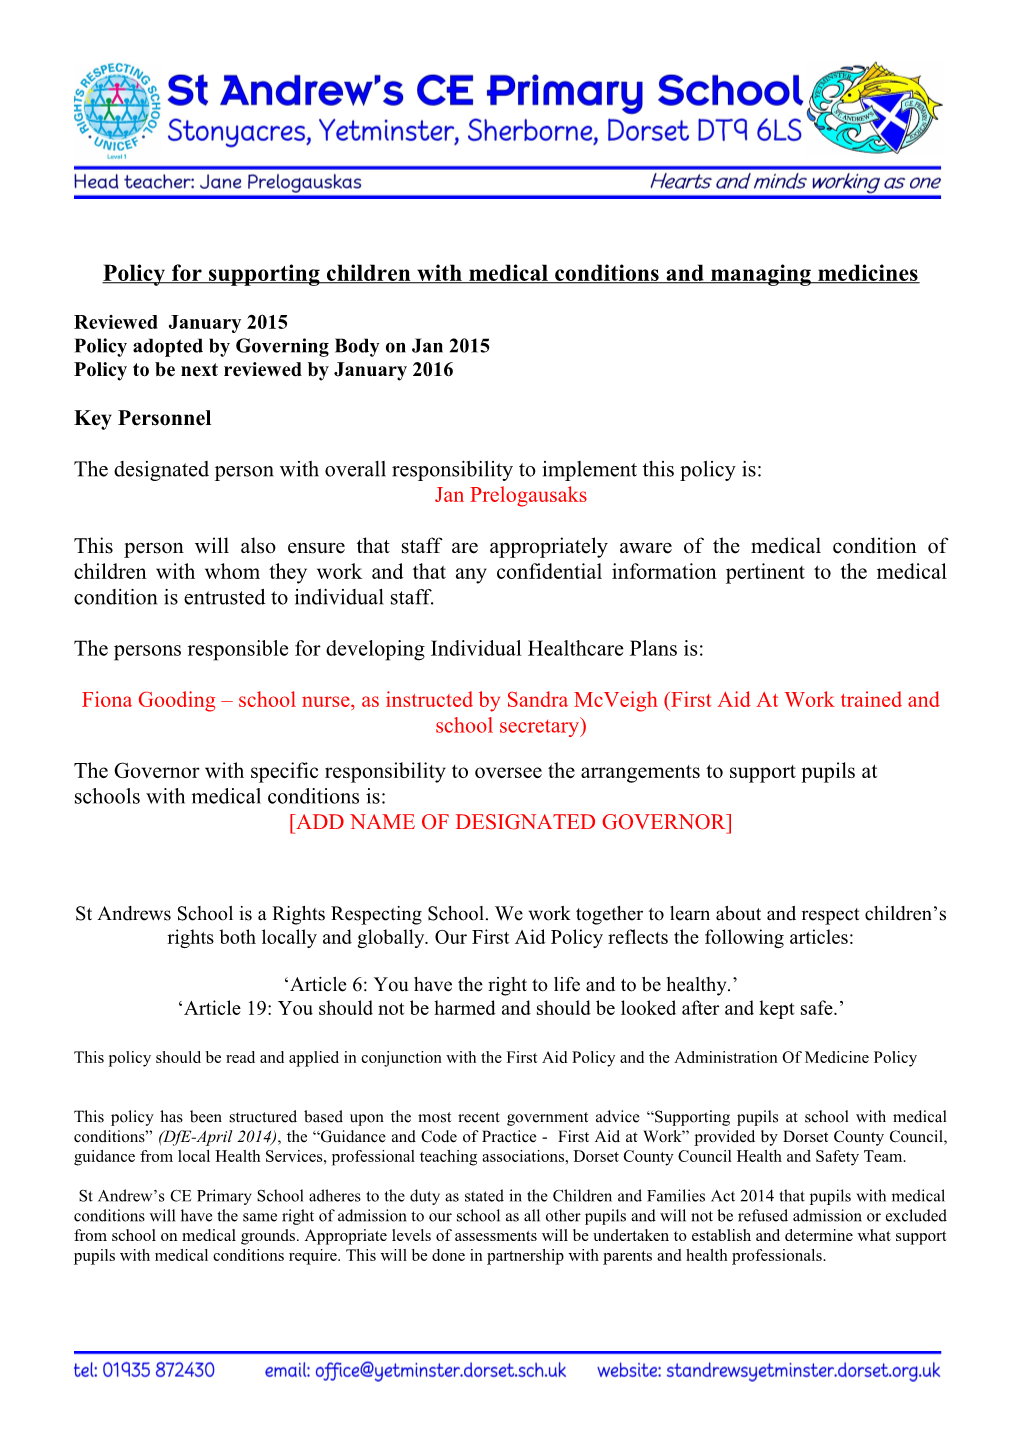 Policy for Supporting Children with Medical Conditions and Managing Medicines